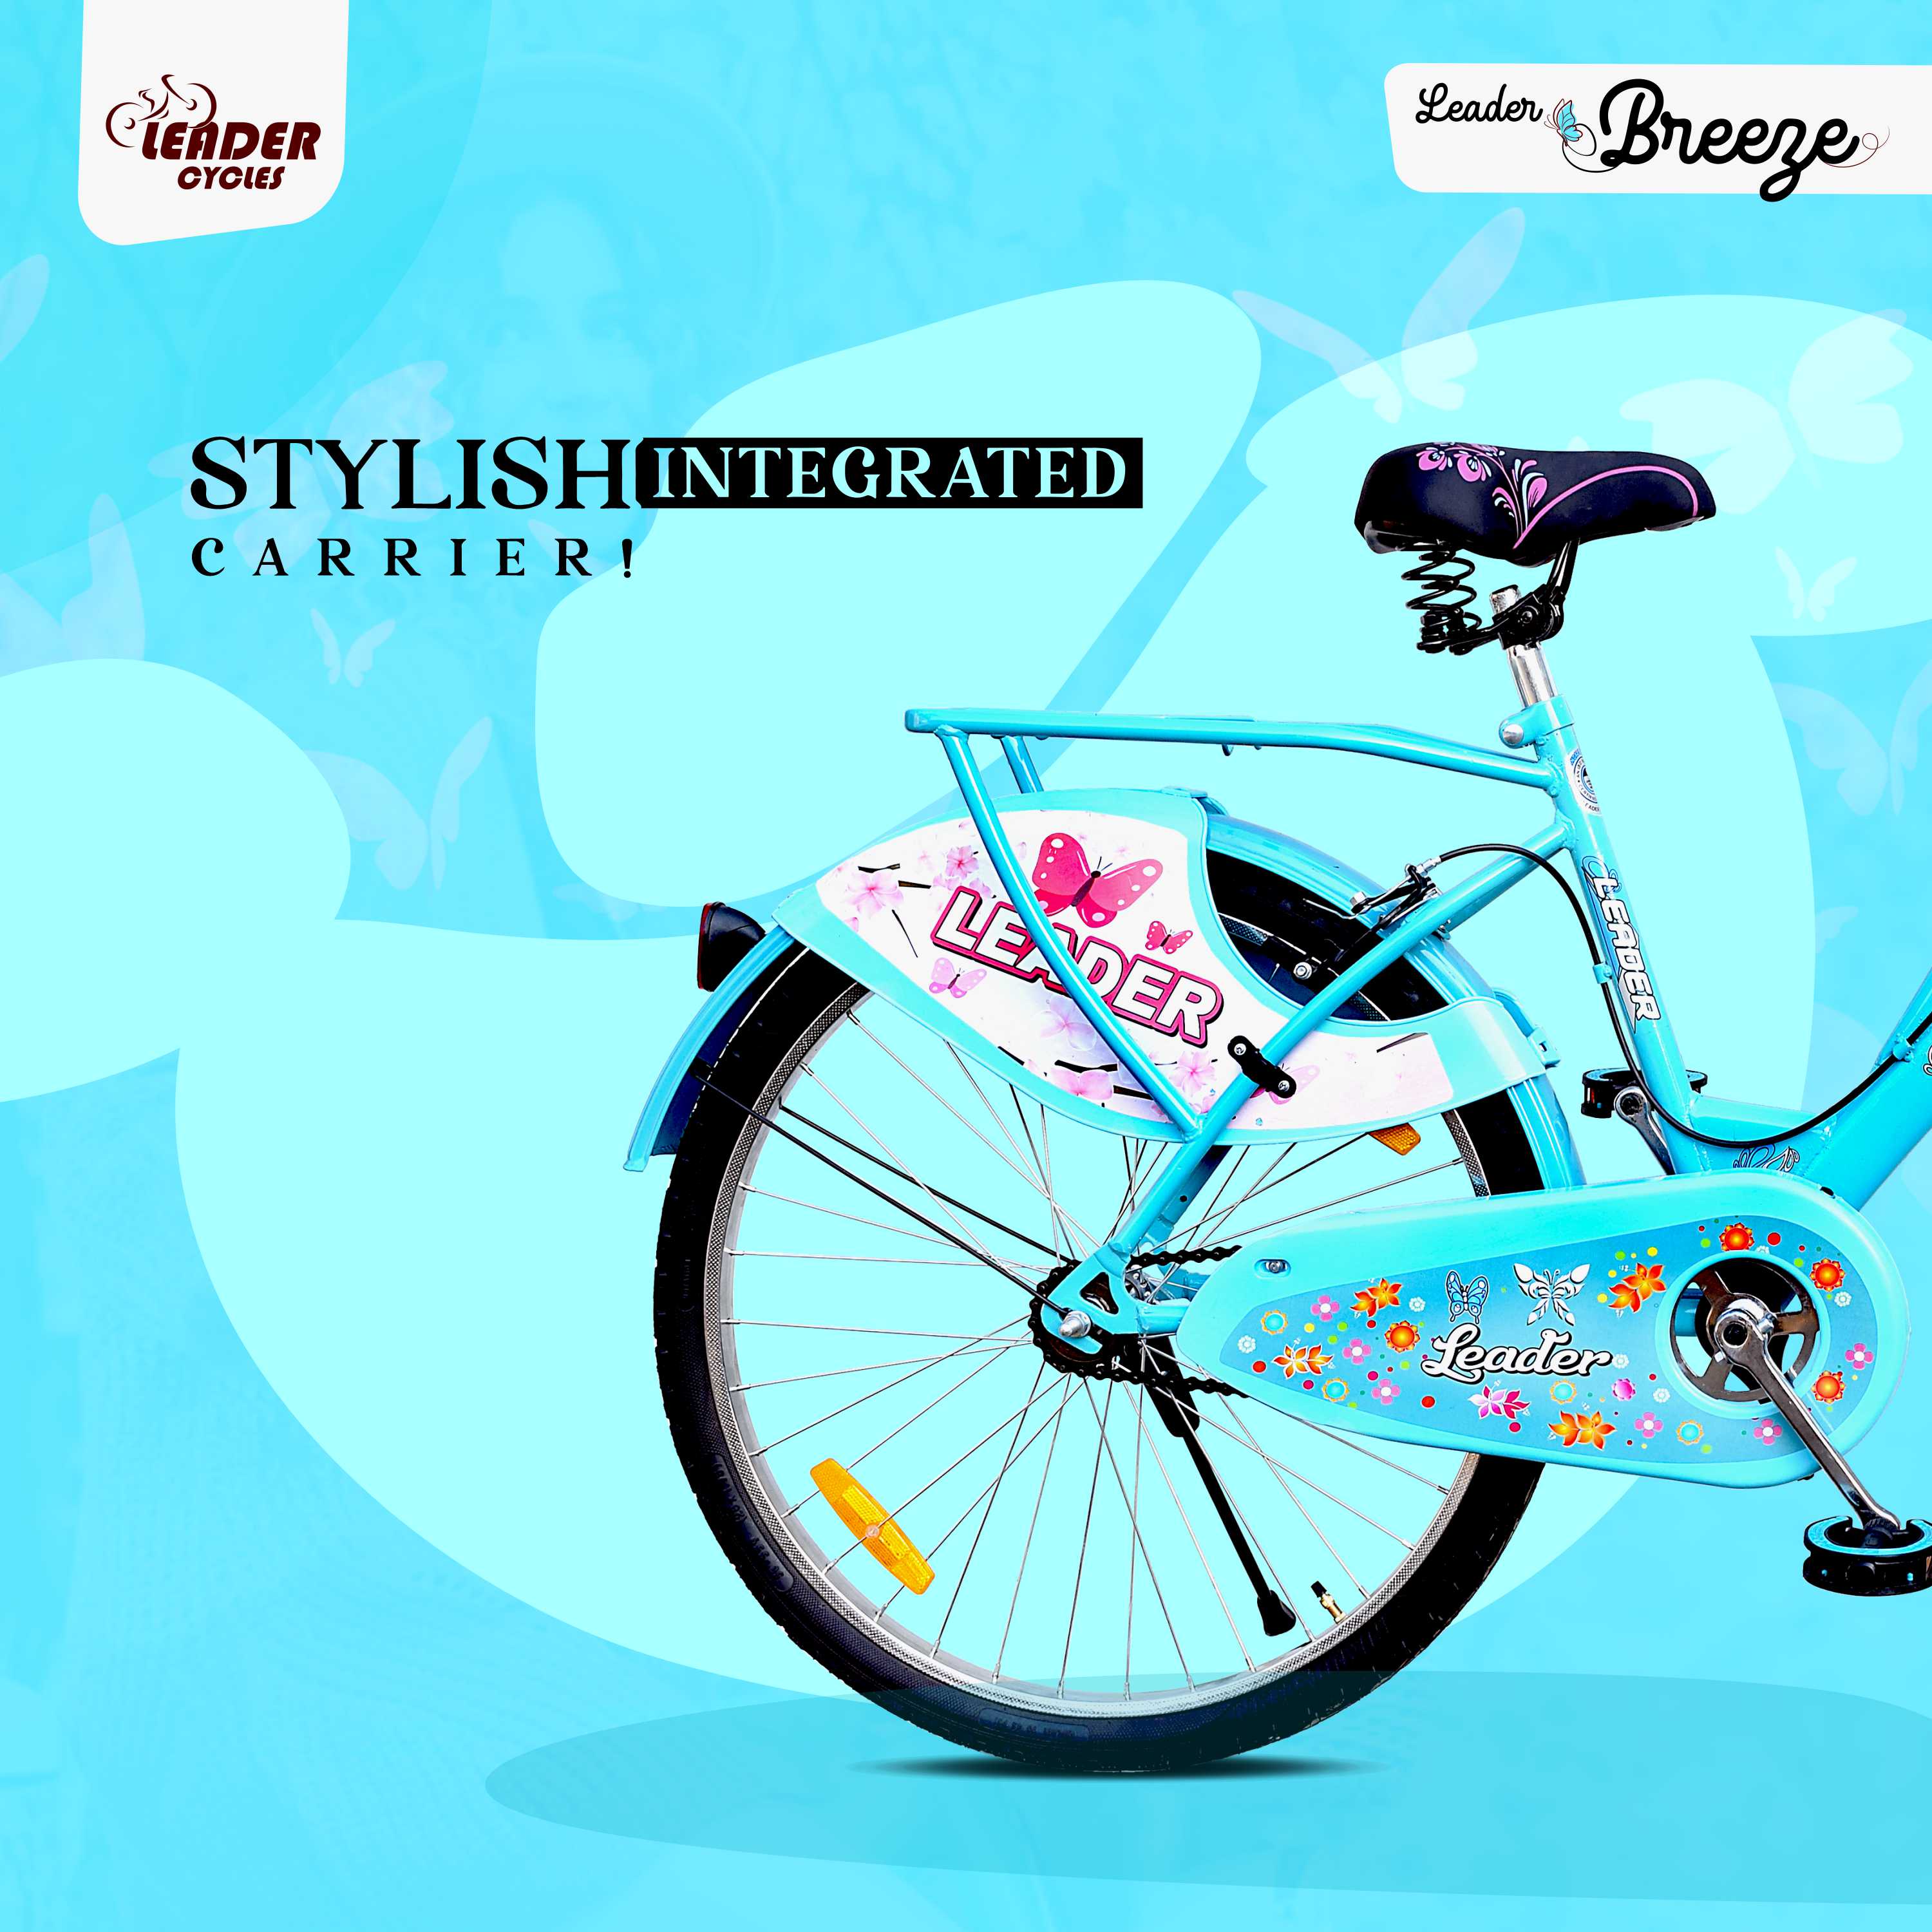 Leader Lady Bird Breeze 26T Bicycle for Girls